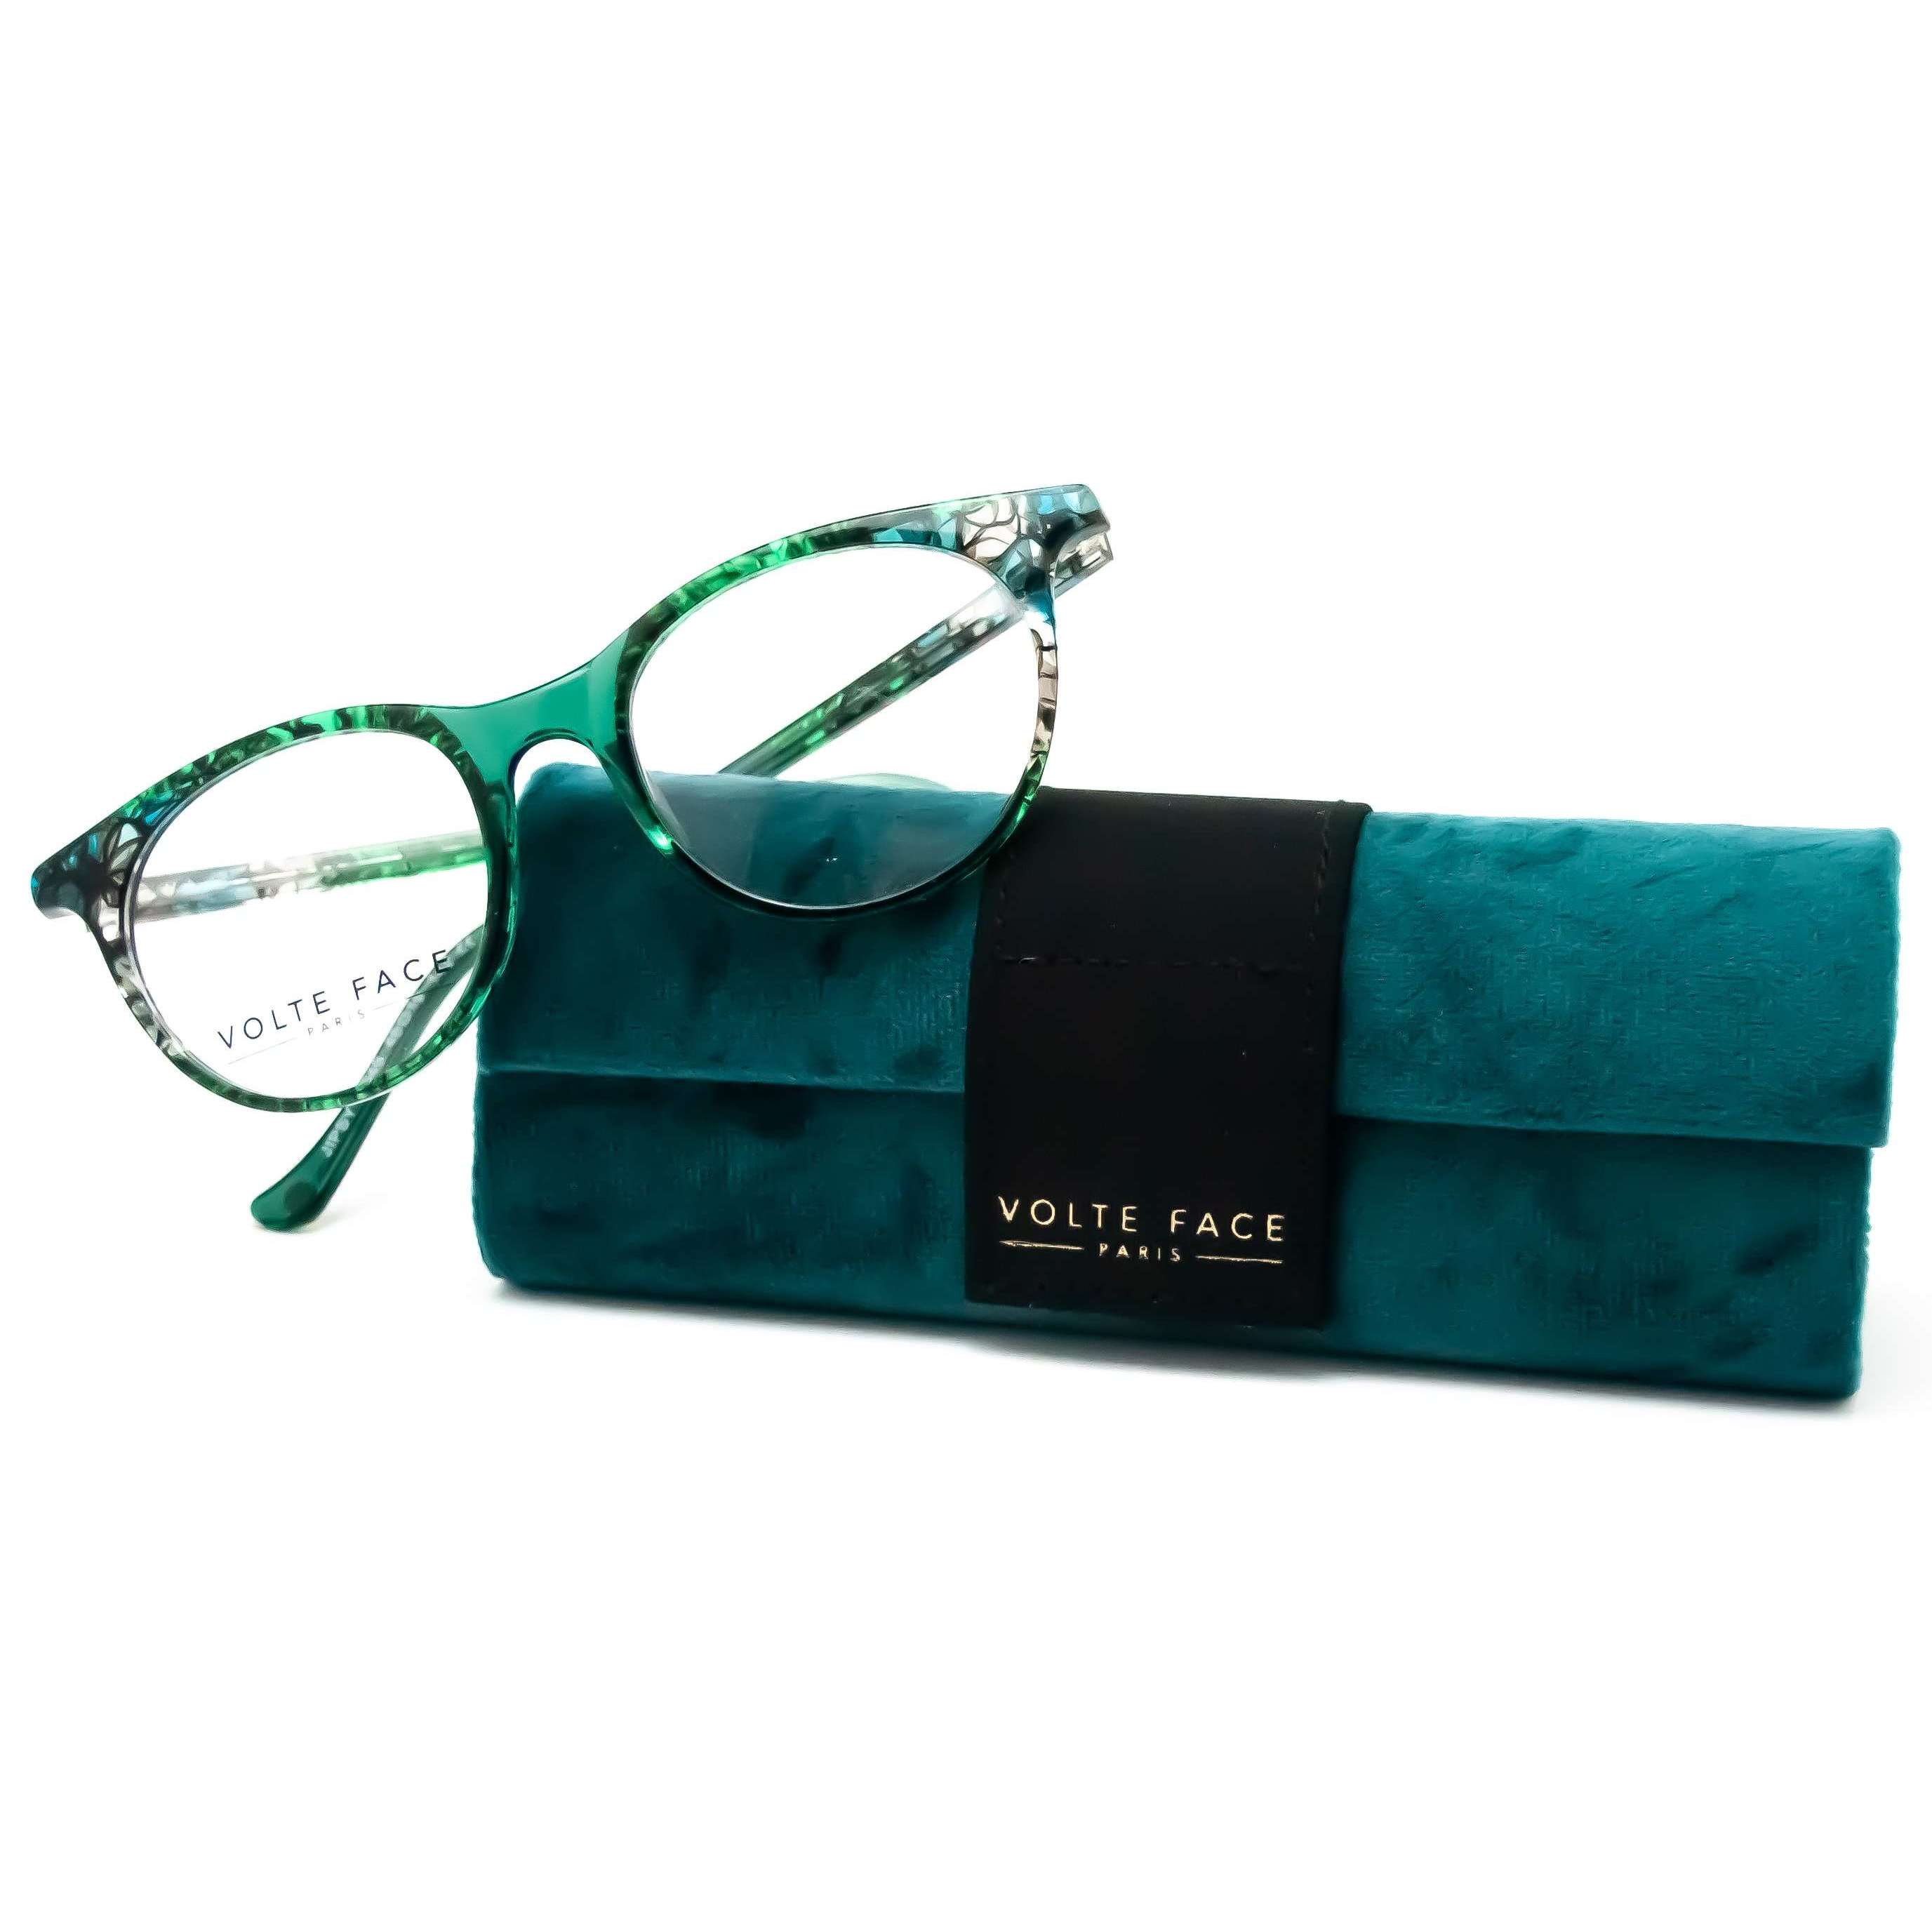 Volte Face Model JIPSY  green Round Glasses